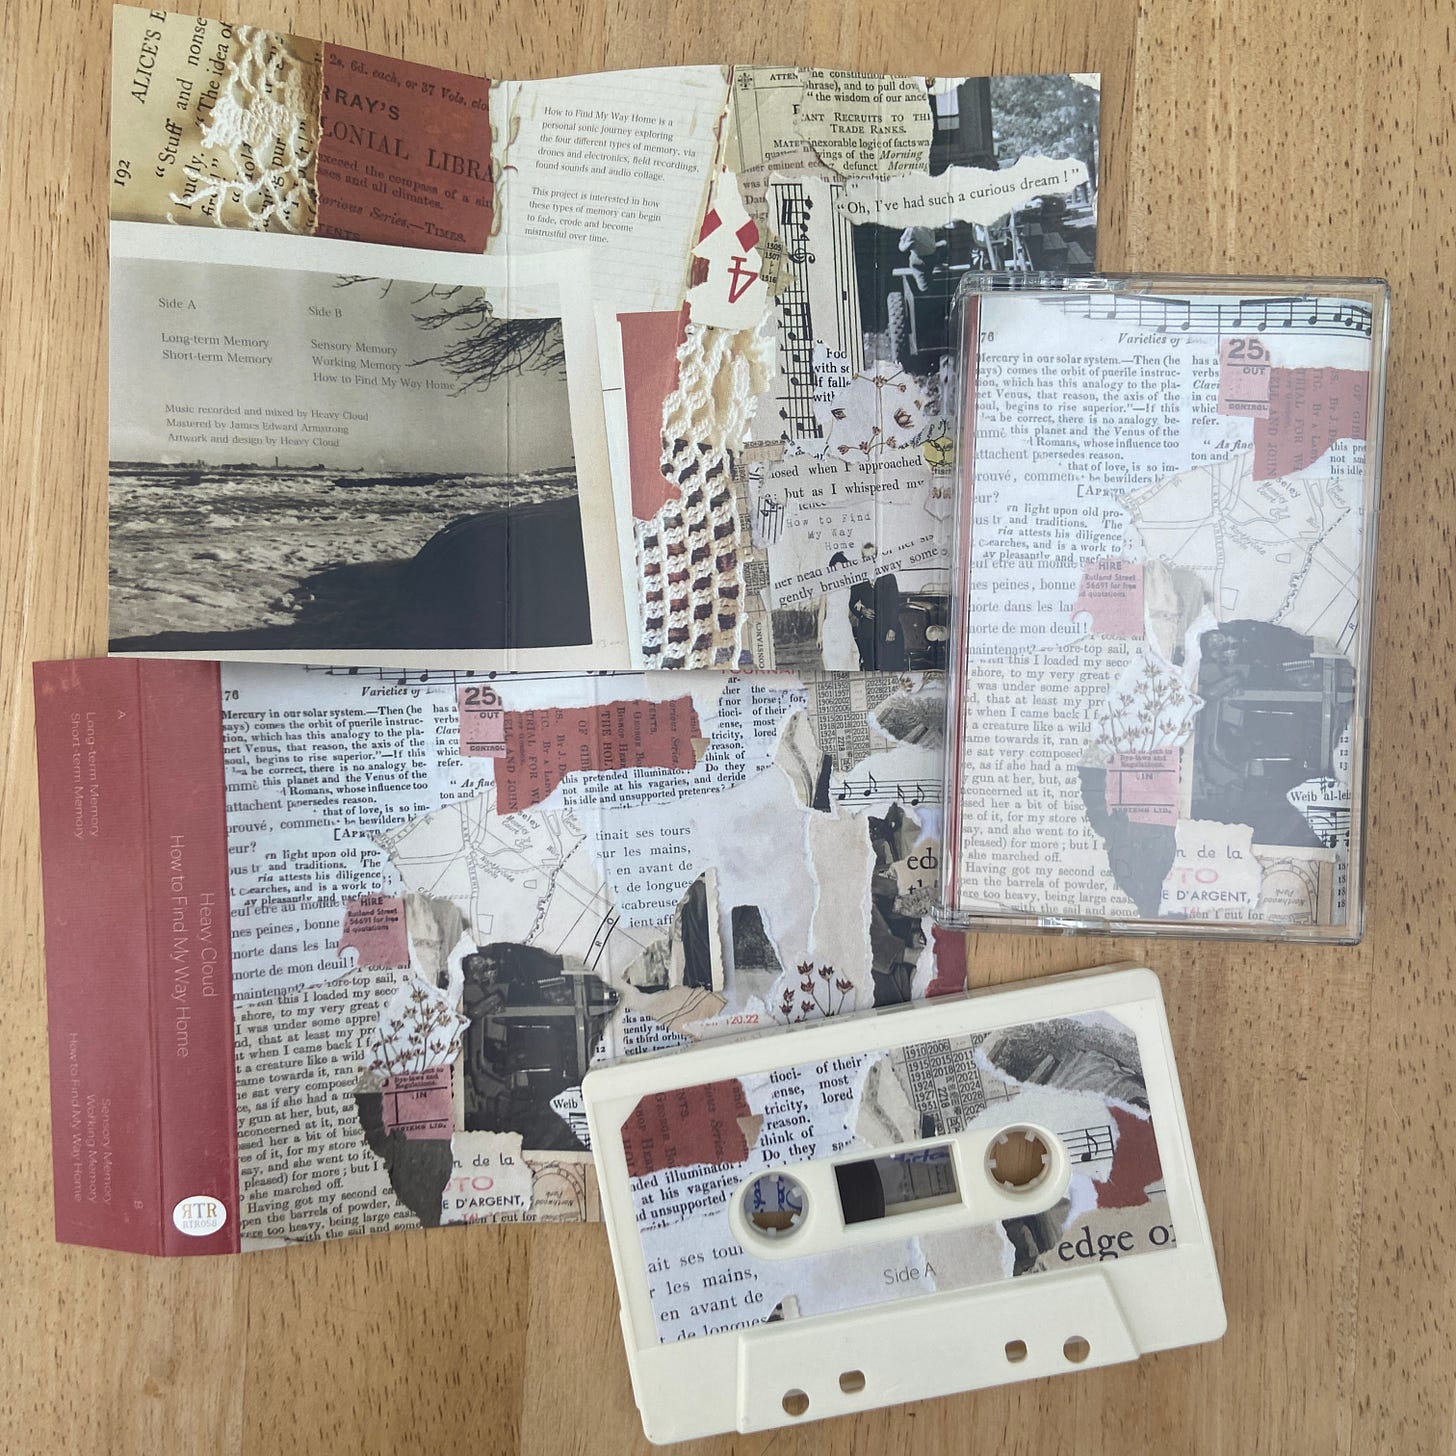 Heavy Cloud – How to Find My Way Home cassette and artwork.